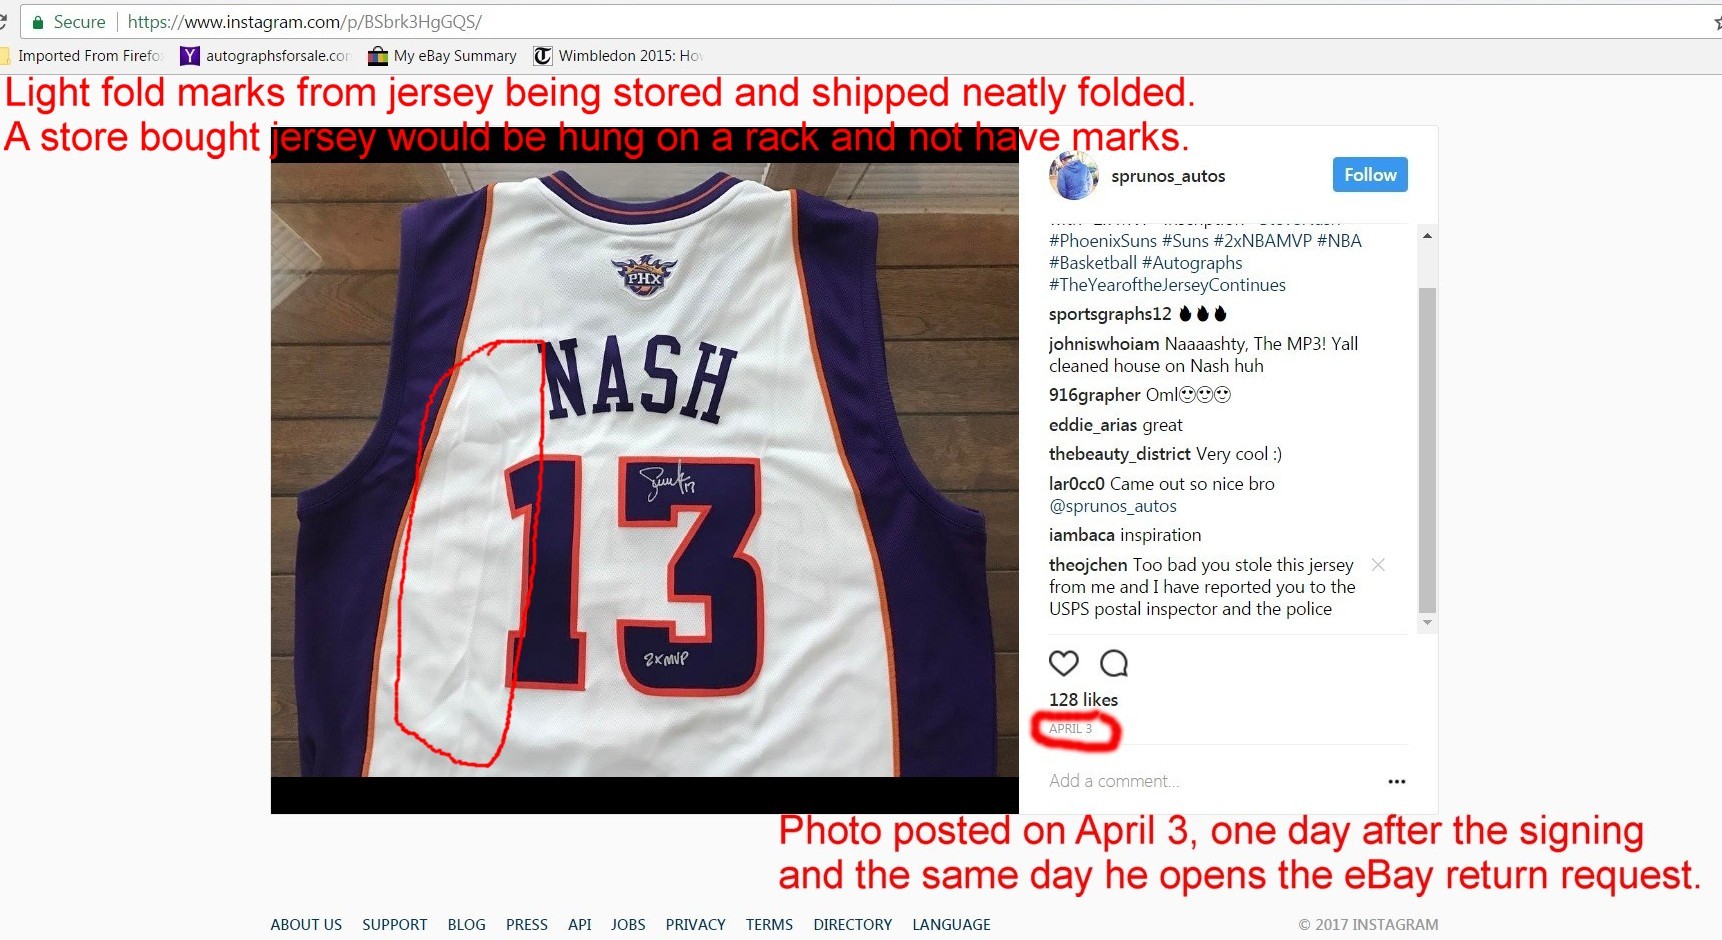 photo proof of Nash jersey posted by Bruno on IG